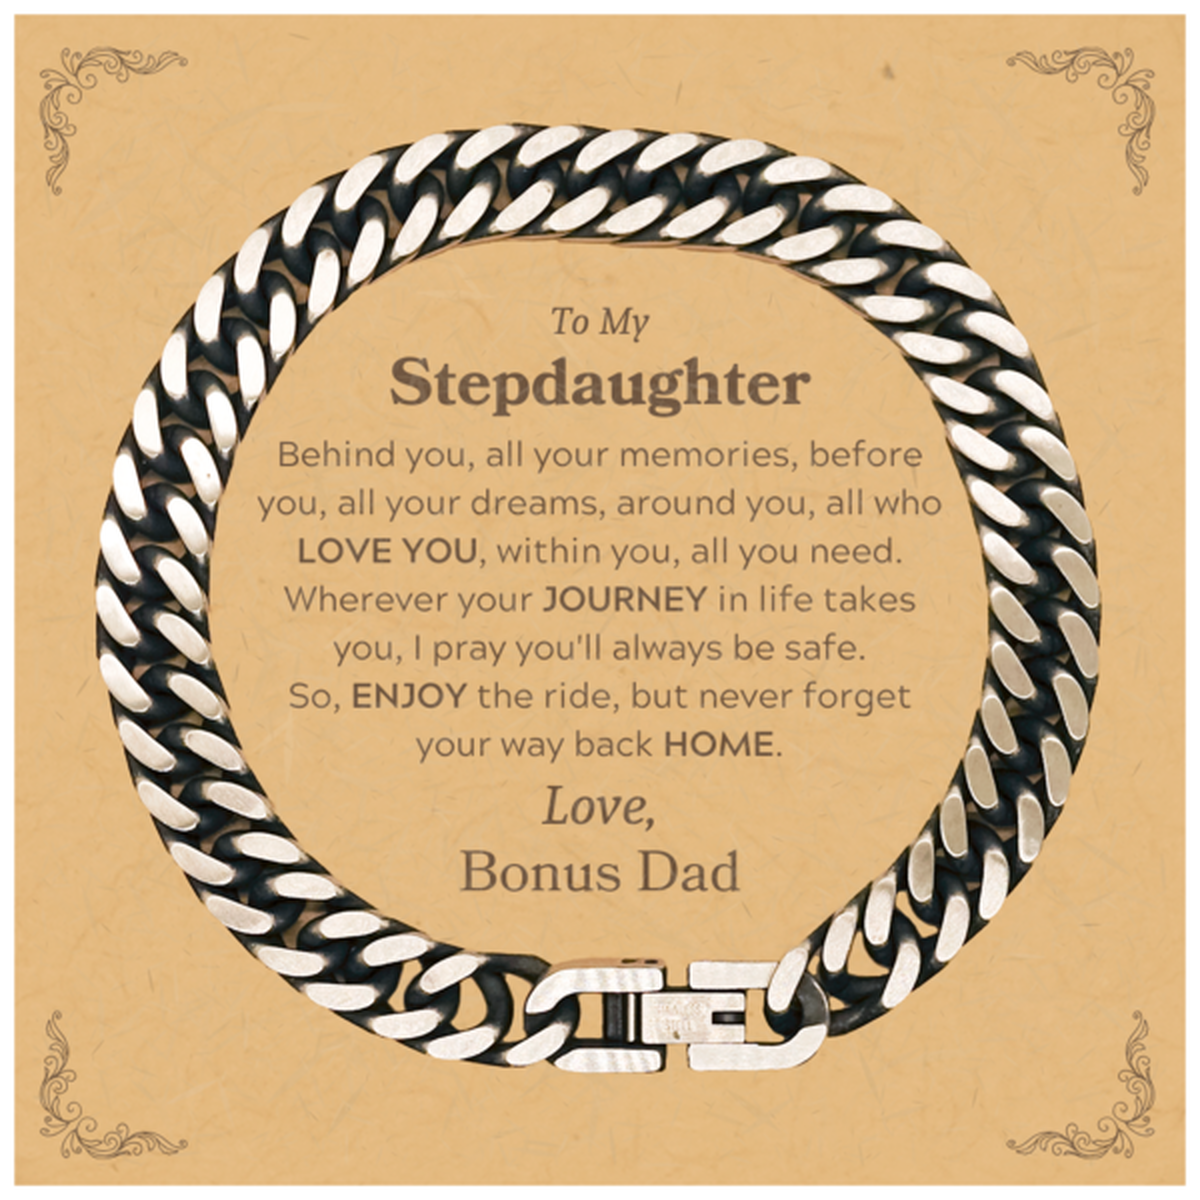 To My Stepdaughter Graduation Gifts from Bonus Dad, Stepdaughter Cuban Link Chain Bracelet Christmas Birthday Gifts for Stepdaughter Behind you, all your memories, before you, all your dreams. Love, Bonus Dad